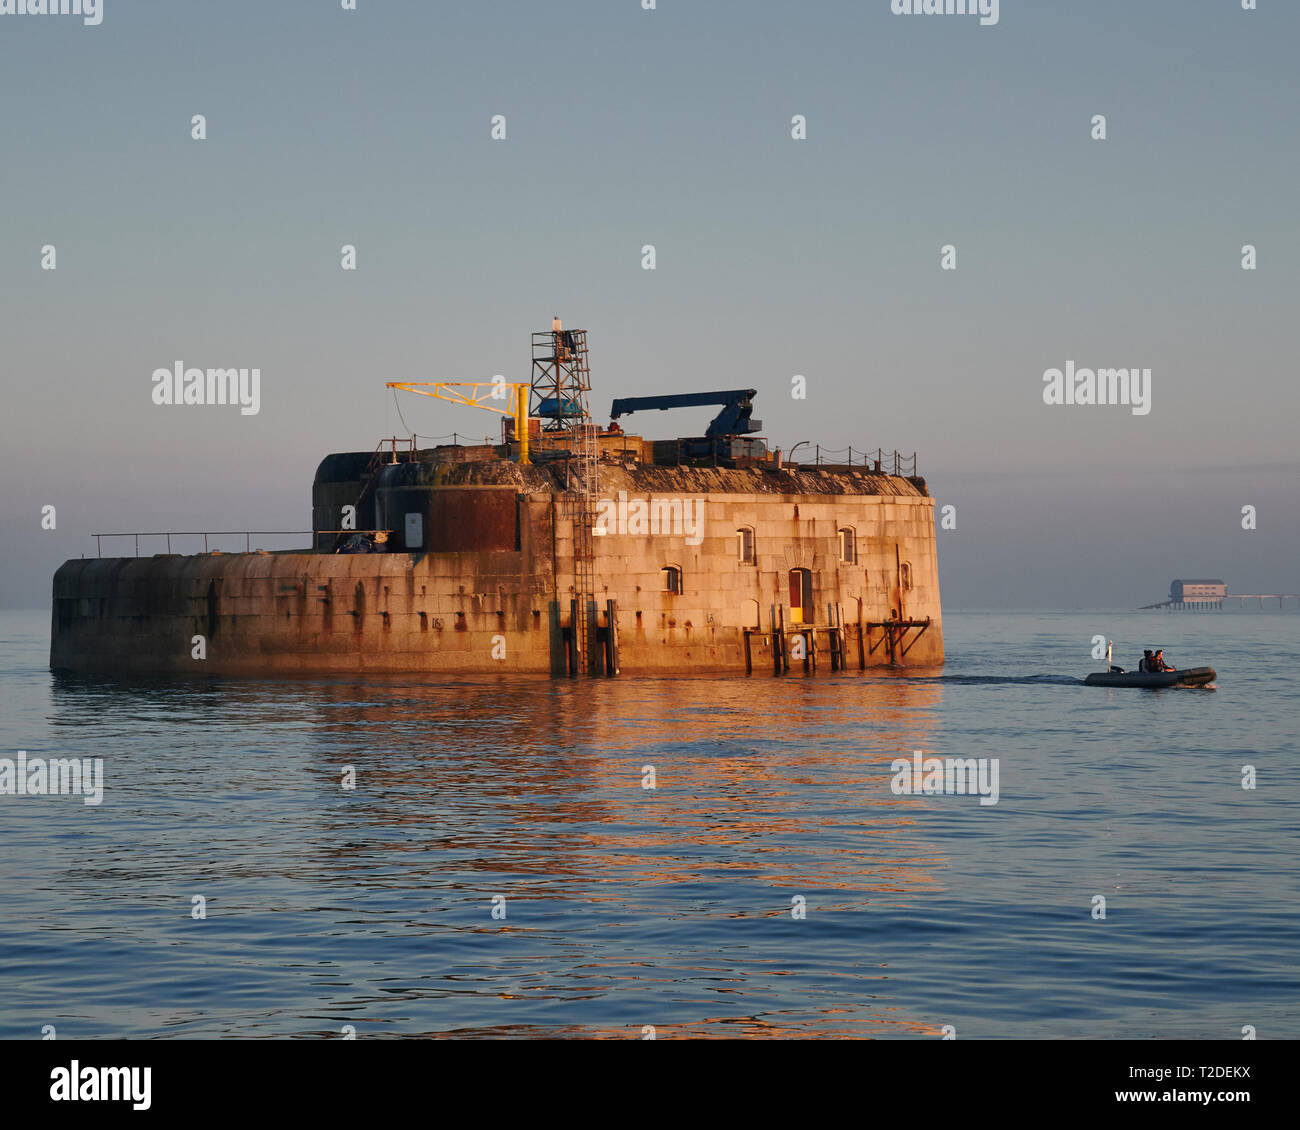 The 1860s granite and iron built St Helens Sea Fort bathed in sunset lighting. Victorian engineering to defend the Royal Navy fleet at anchor Stock Photo